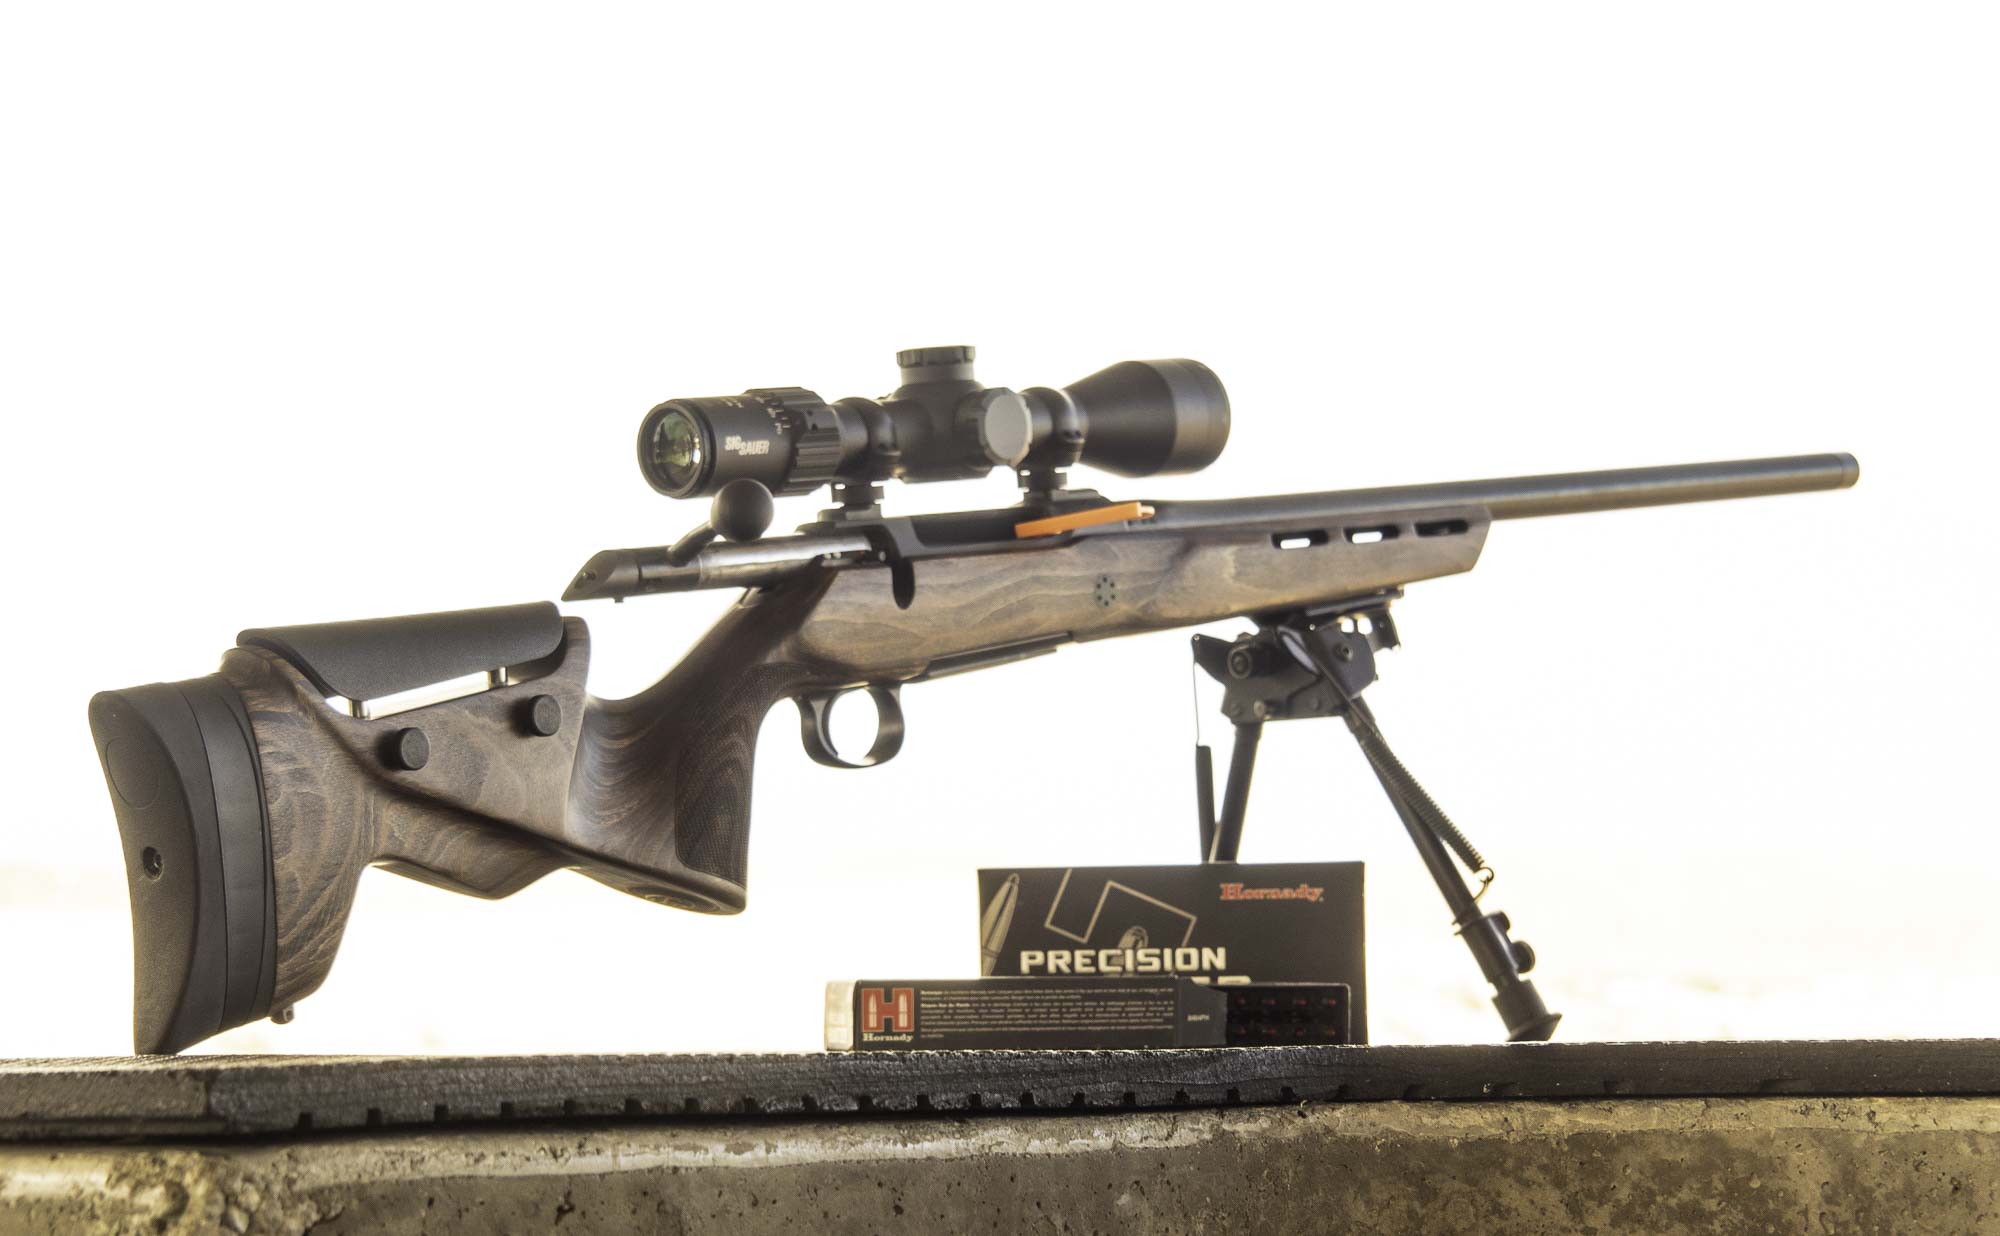 Sauer S100 Pantera and S100 Fieldshoot rifles in 6.5 PRC.